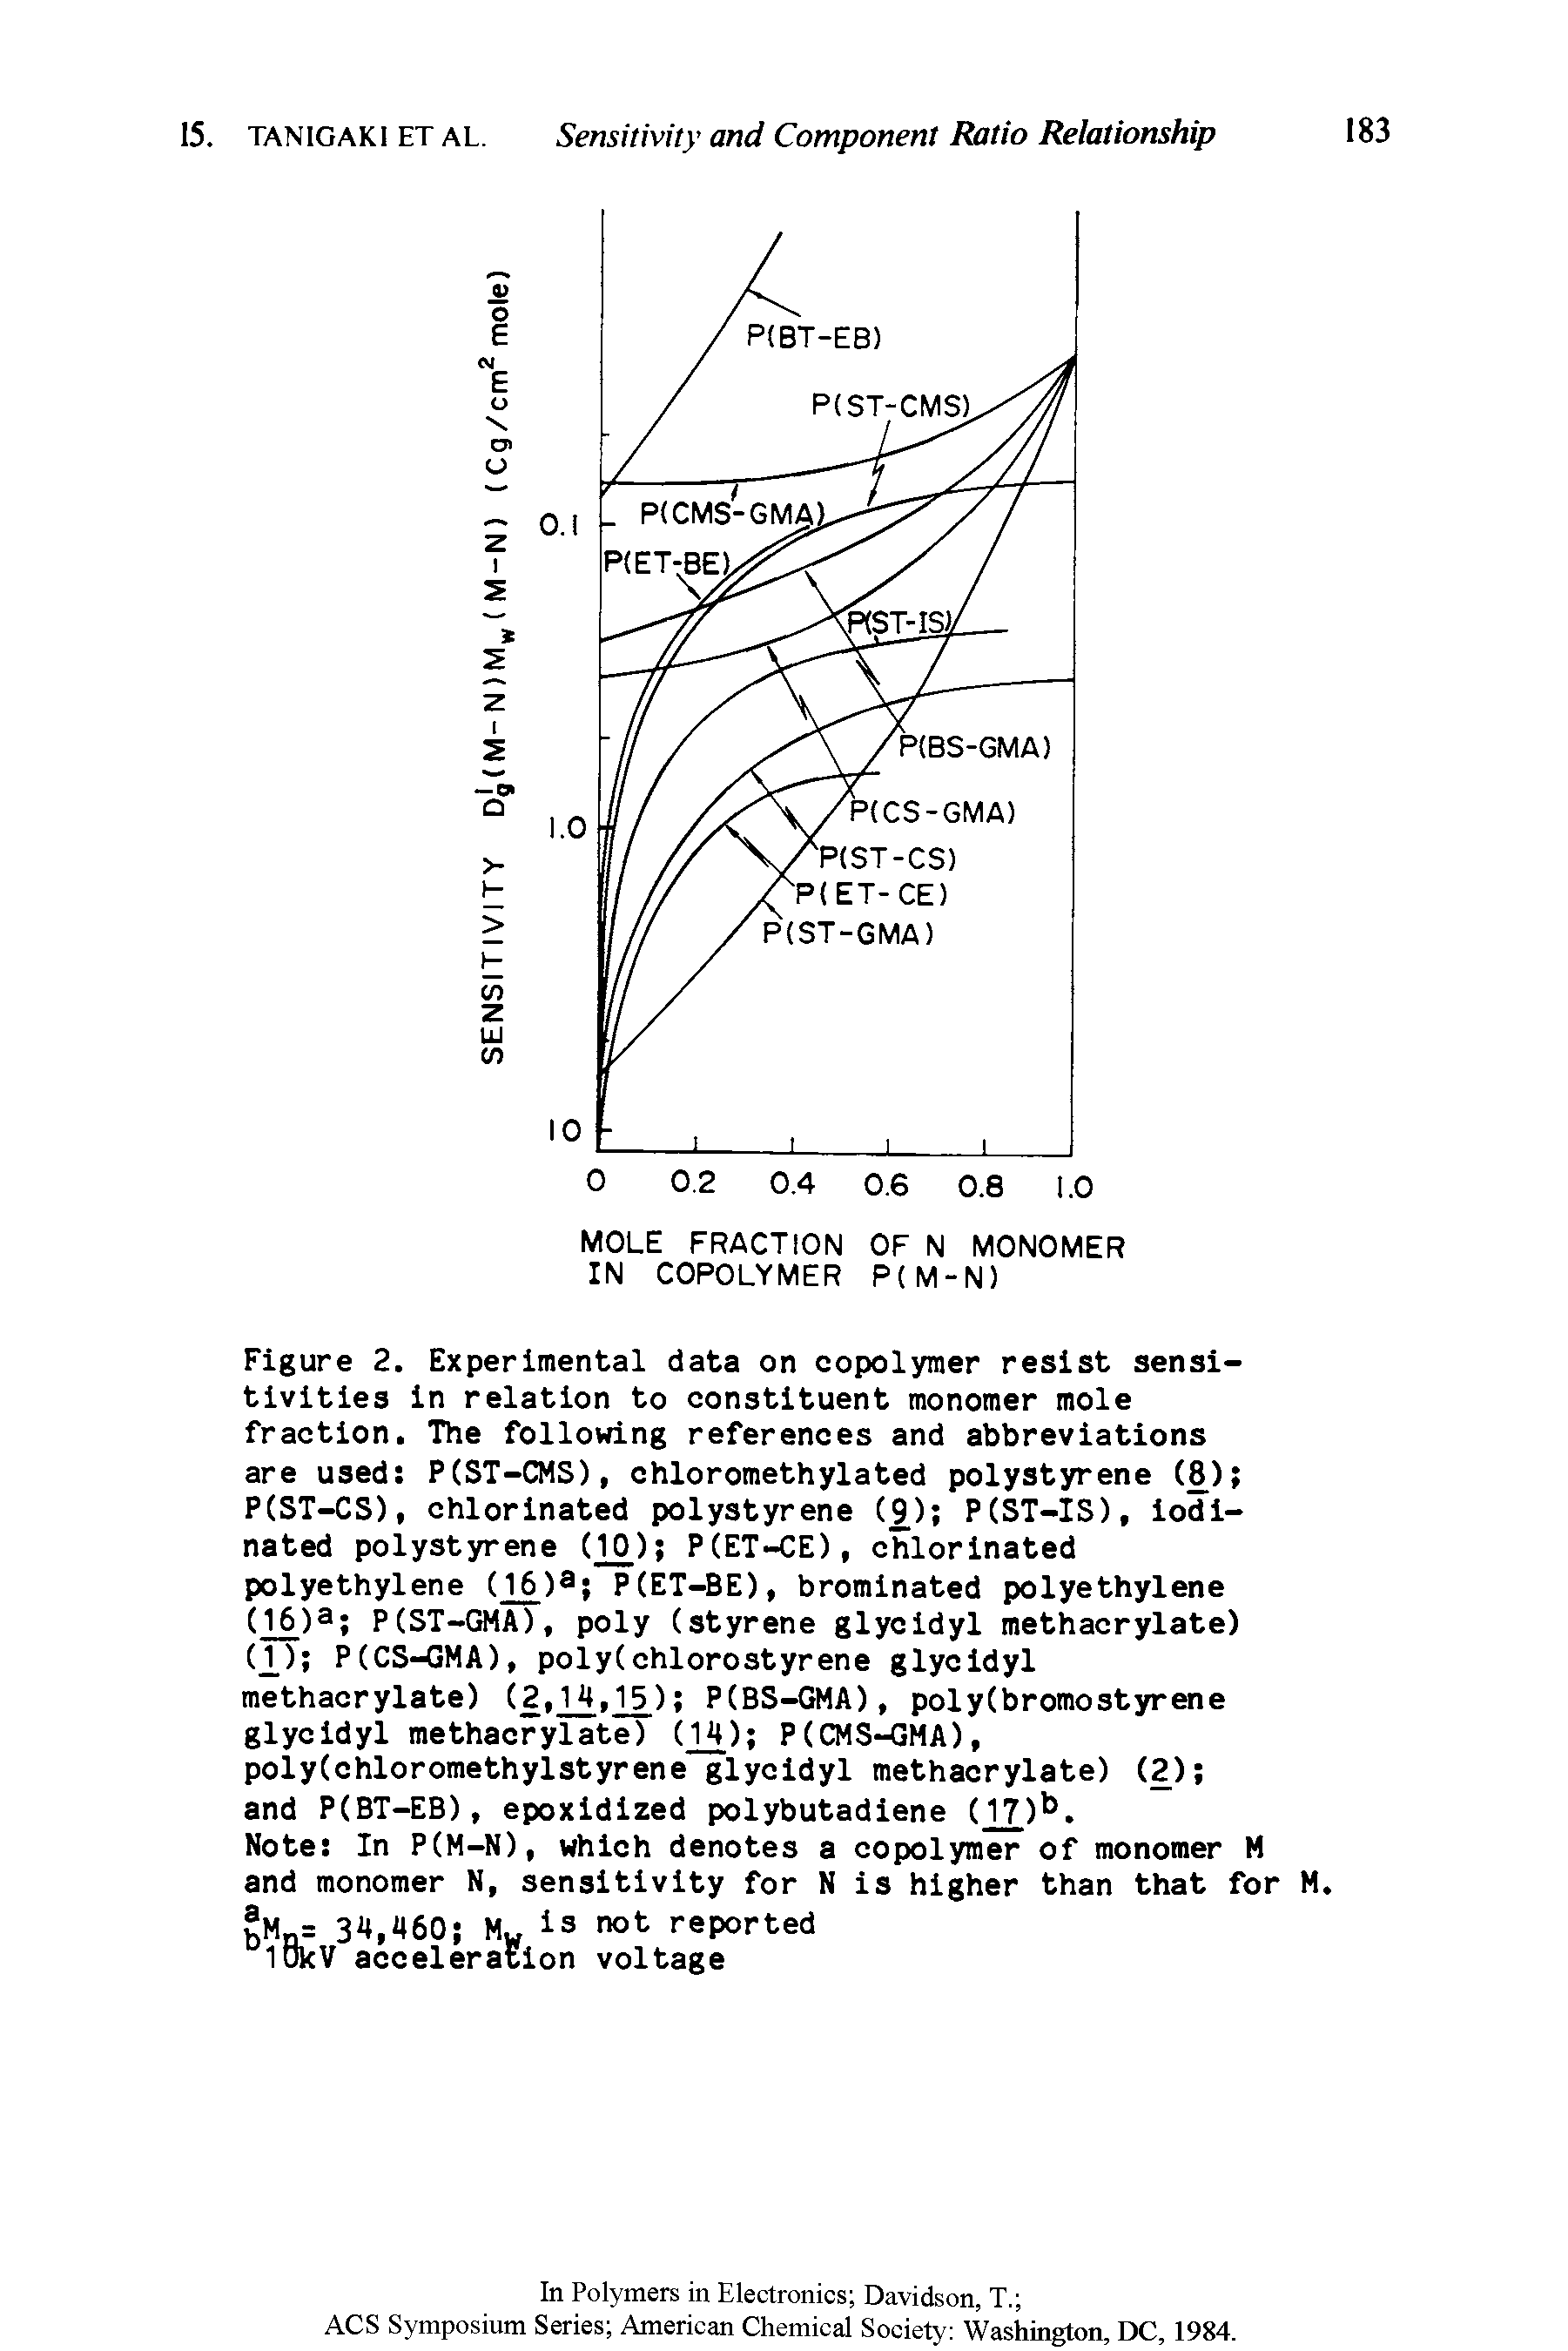 Figure 2. Experimental data on copolymer resist sensitivities in relation to constituent monomer mole fraction. The following references and abbreviations are used P(ST-CMS), chloromethylated polystyrene (8) P(ST-CS), chlorinated polystyrene ( ) P(ST-IS), iodi-nated polystyrene (100 P(ET-CE), chlorinated polyethylene ( 6)a P(ET-BE), brominated polyethylene C165a P(ST-GMA), poly (styrene glycidyl methacrylate)...